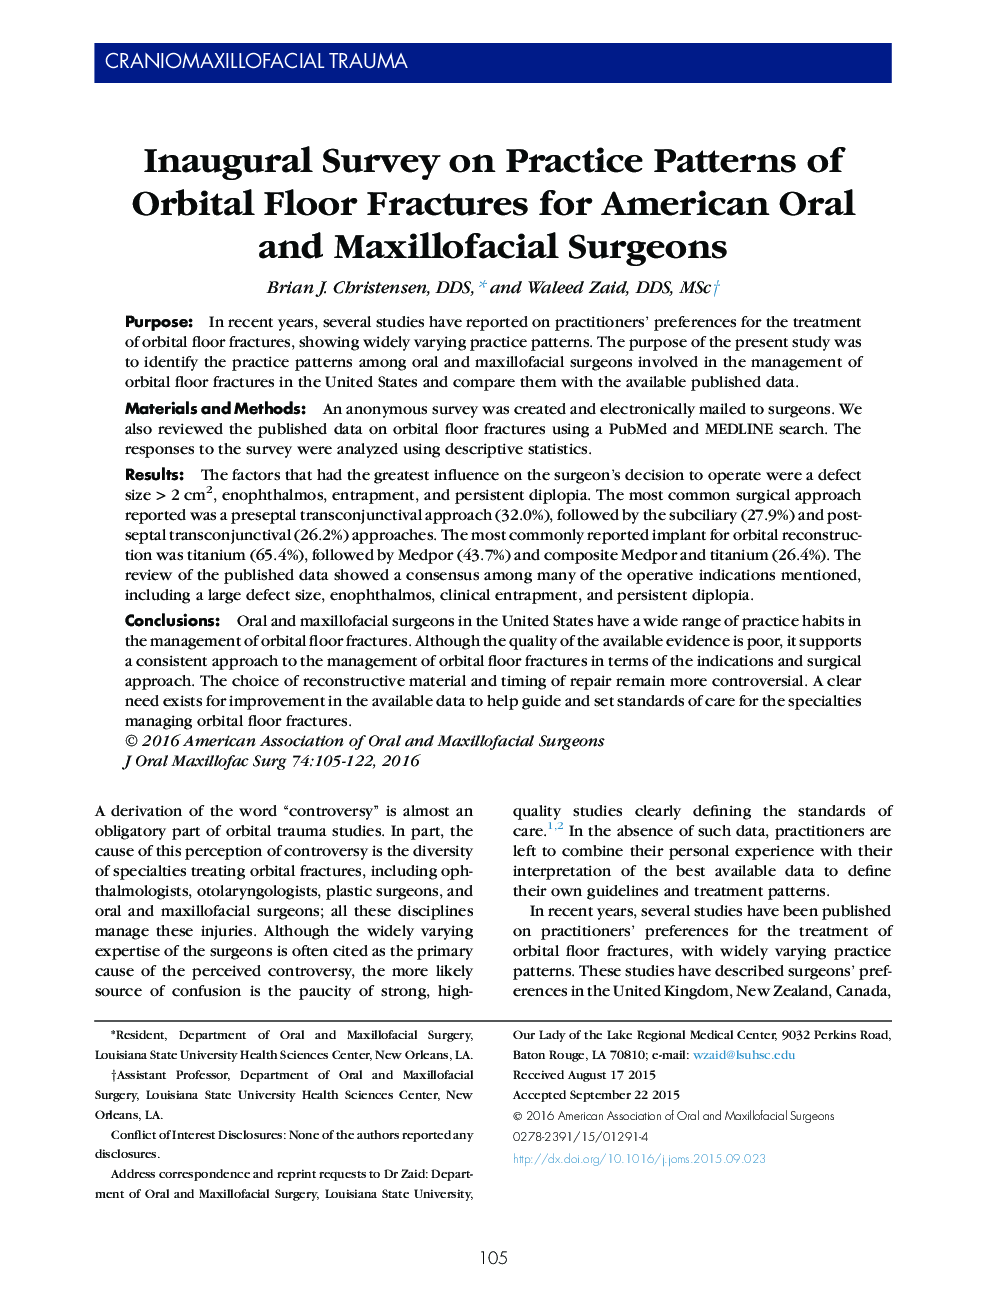 Inaugural Survey on Practice Patterns of Orbital Floor Fractures for American Oral and Maxillofacial Surgeons 